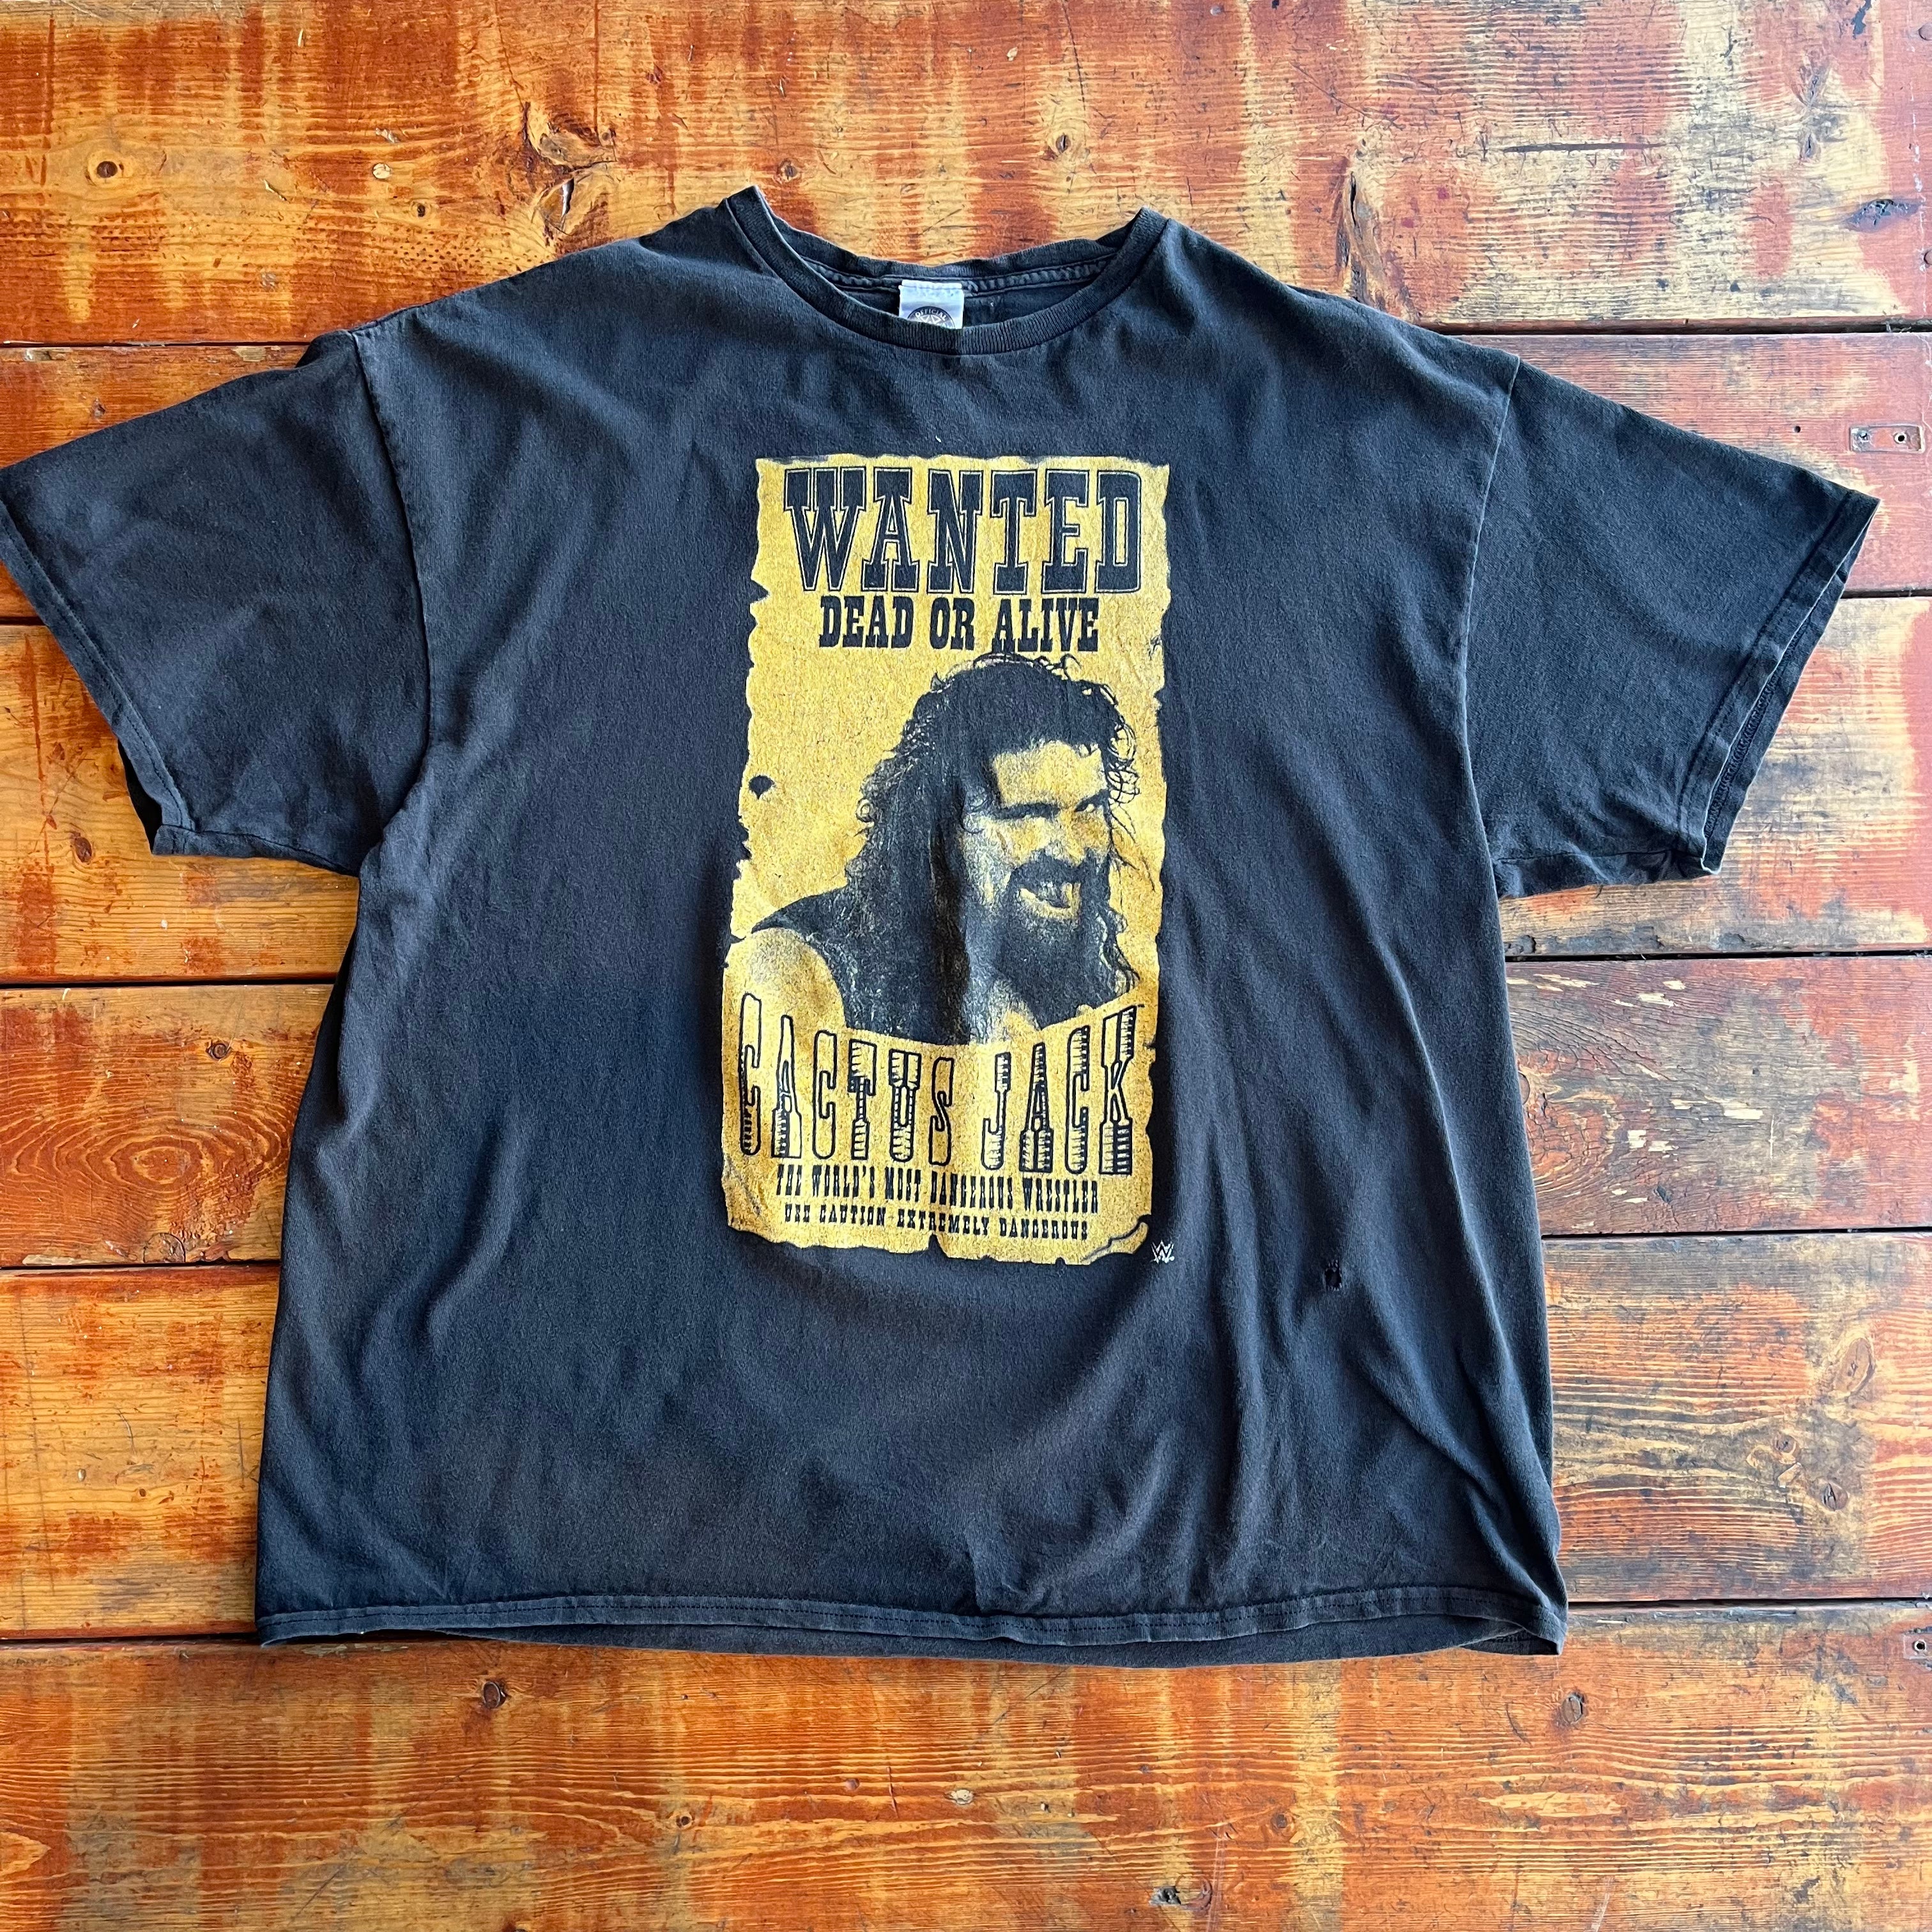 2017 WWE Cactus Jack - Wanted Dead or Alive T-Shirt (XXL)